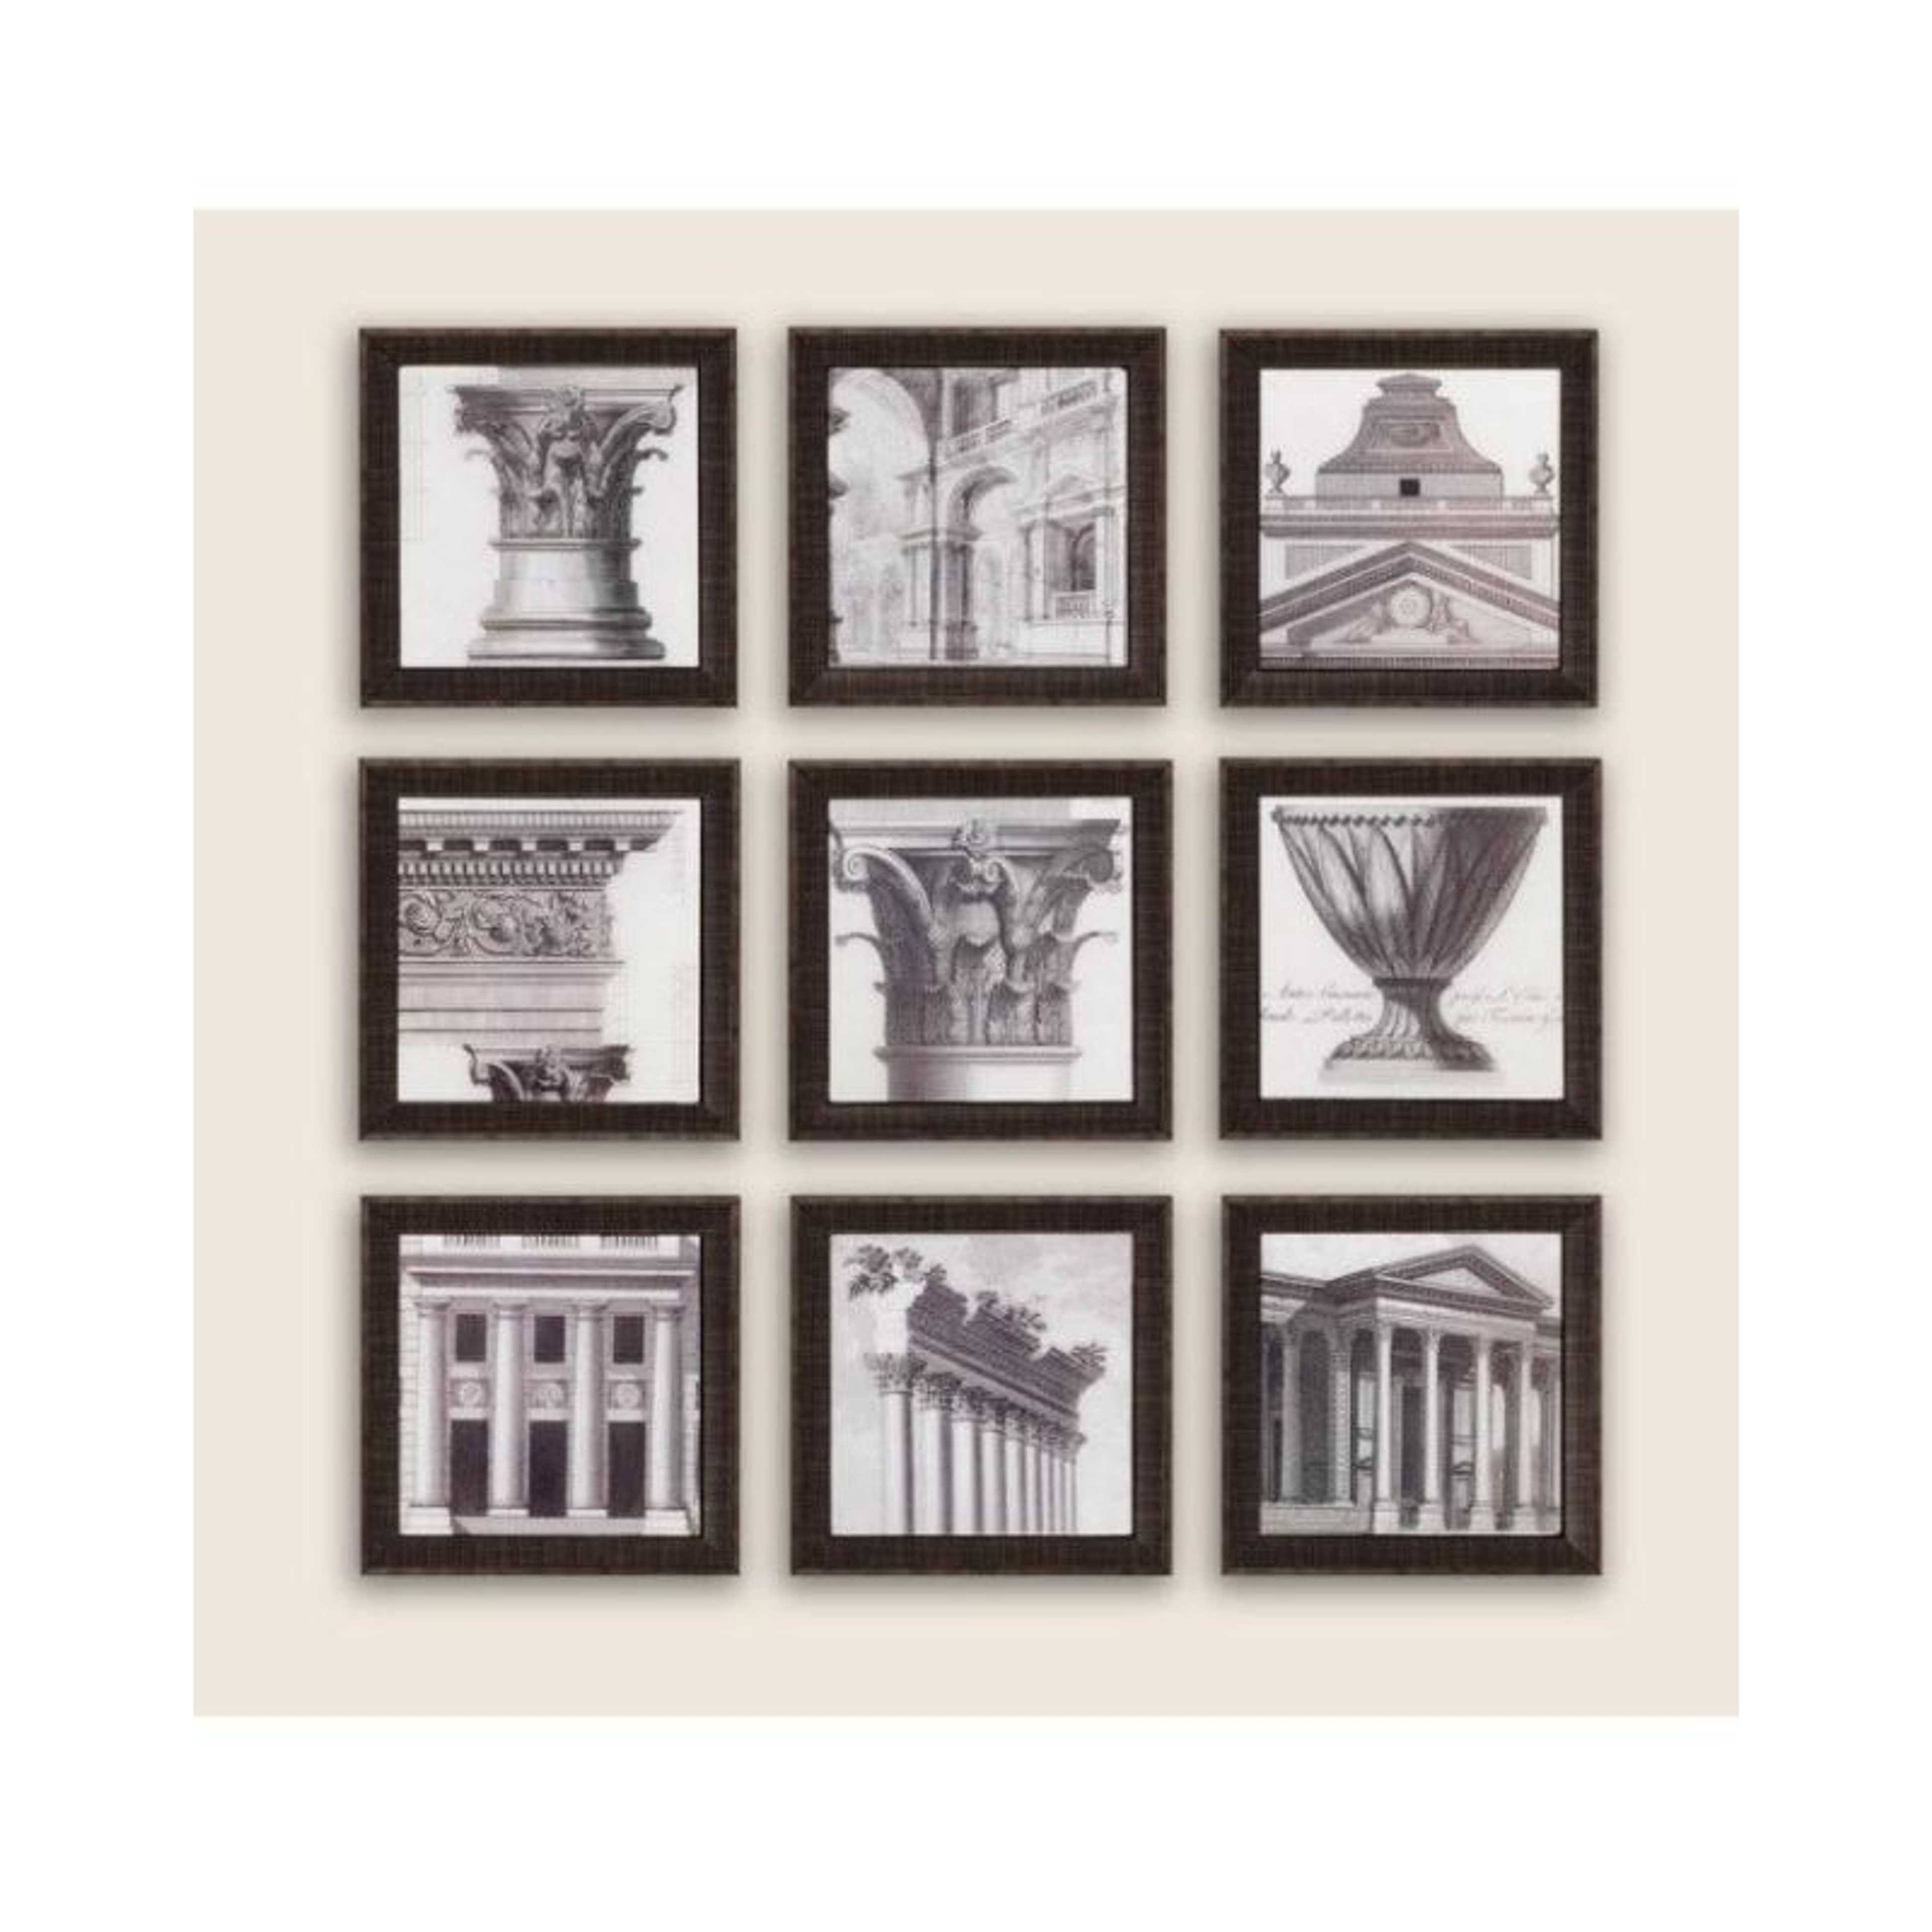 Pack of 9 - Antique Look Photo Frames Collage Wall Hanging Wall Decor Set